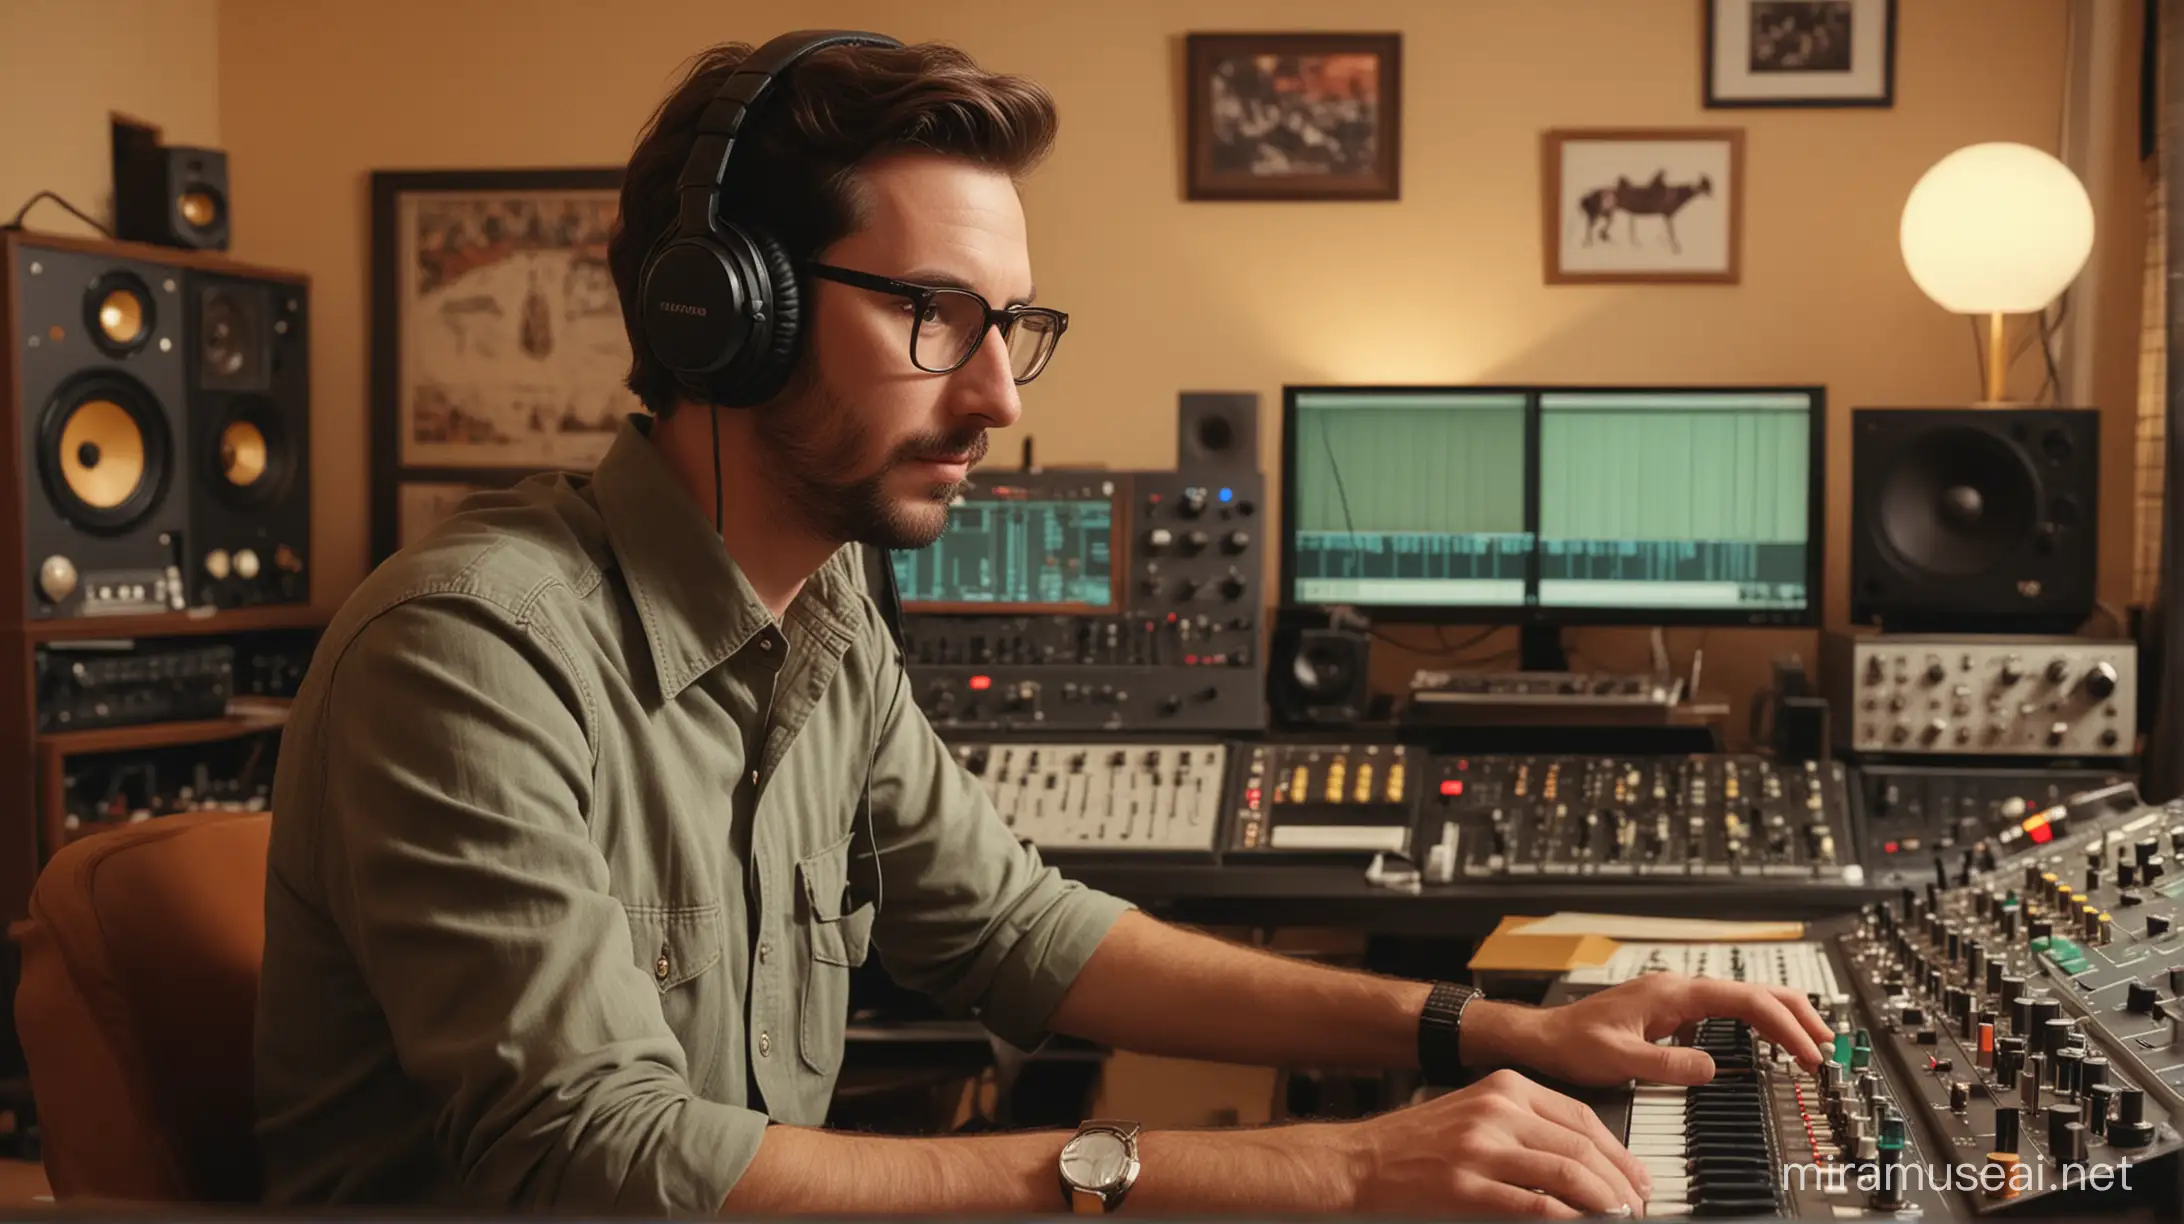 high quality cinematic portrait of a male sound engener sitting at a home studio editing desk from the 1970s  in the style of a wes anderson film